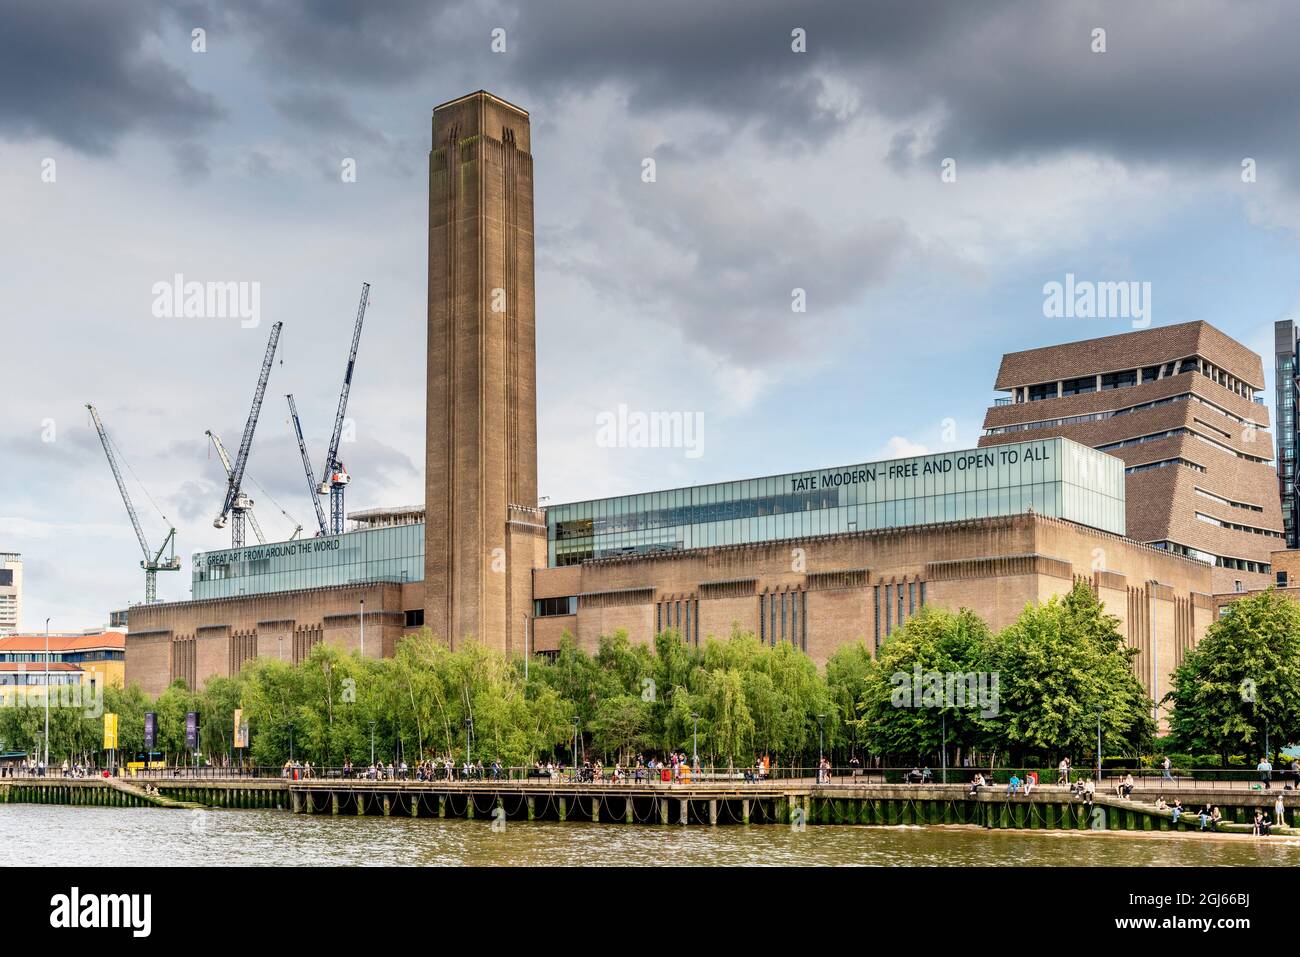 The Tate Modern Art Gallery, Londres, Royaume-Uni. Banque D'Images